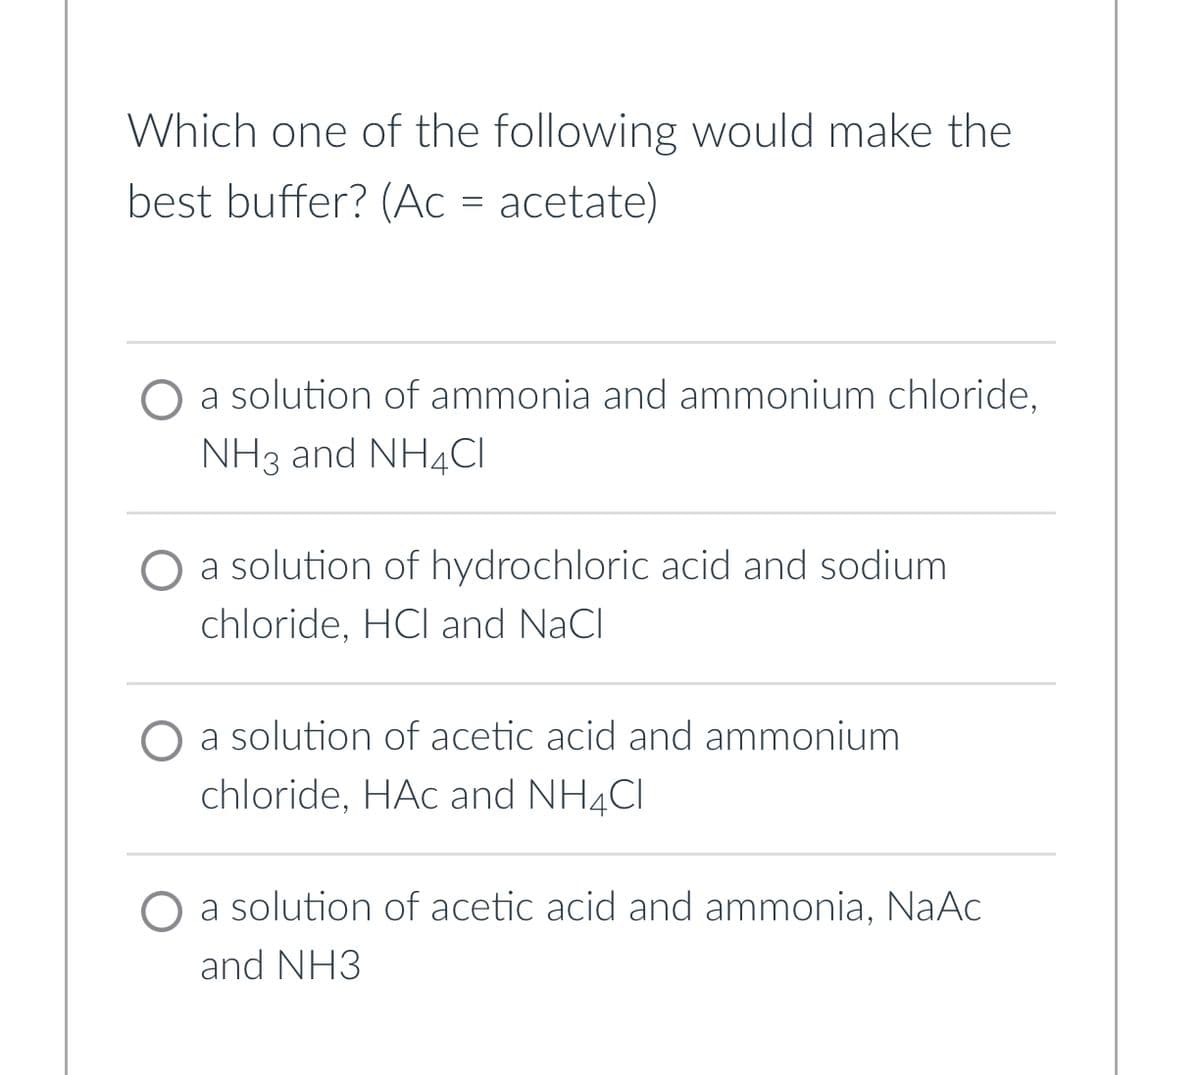 Which one of the following would make the
best buffer? (Ac = acetate)
a solution of ammonia and ammonium chloride,
NH3 and NH4Cl
O a solution of hydrochloric acid and sodium
chloride, HCI and NaCl
a solution of acetic acid and ammonium
chloride, HAC and NH4Cl
solution of acetic acid and ammonia, NaAc
and NH3